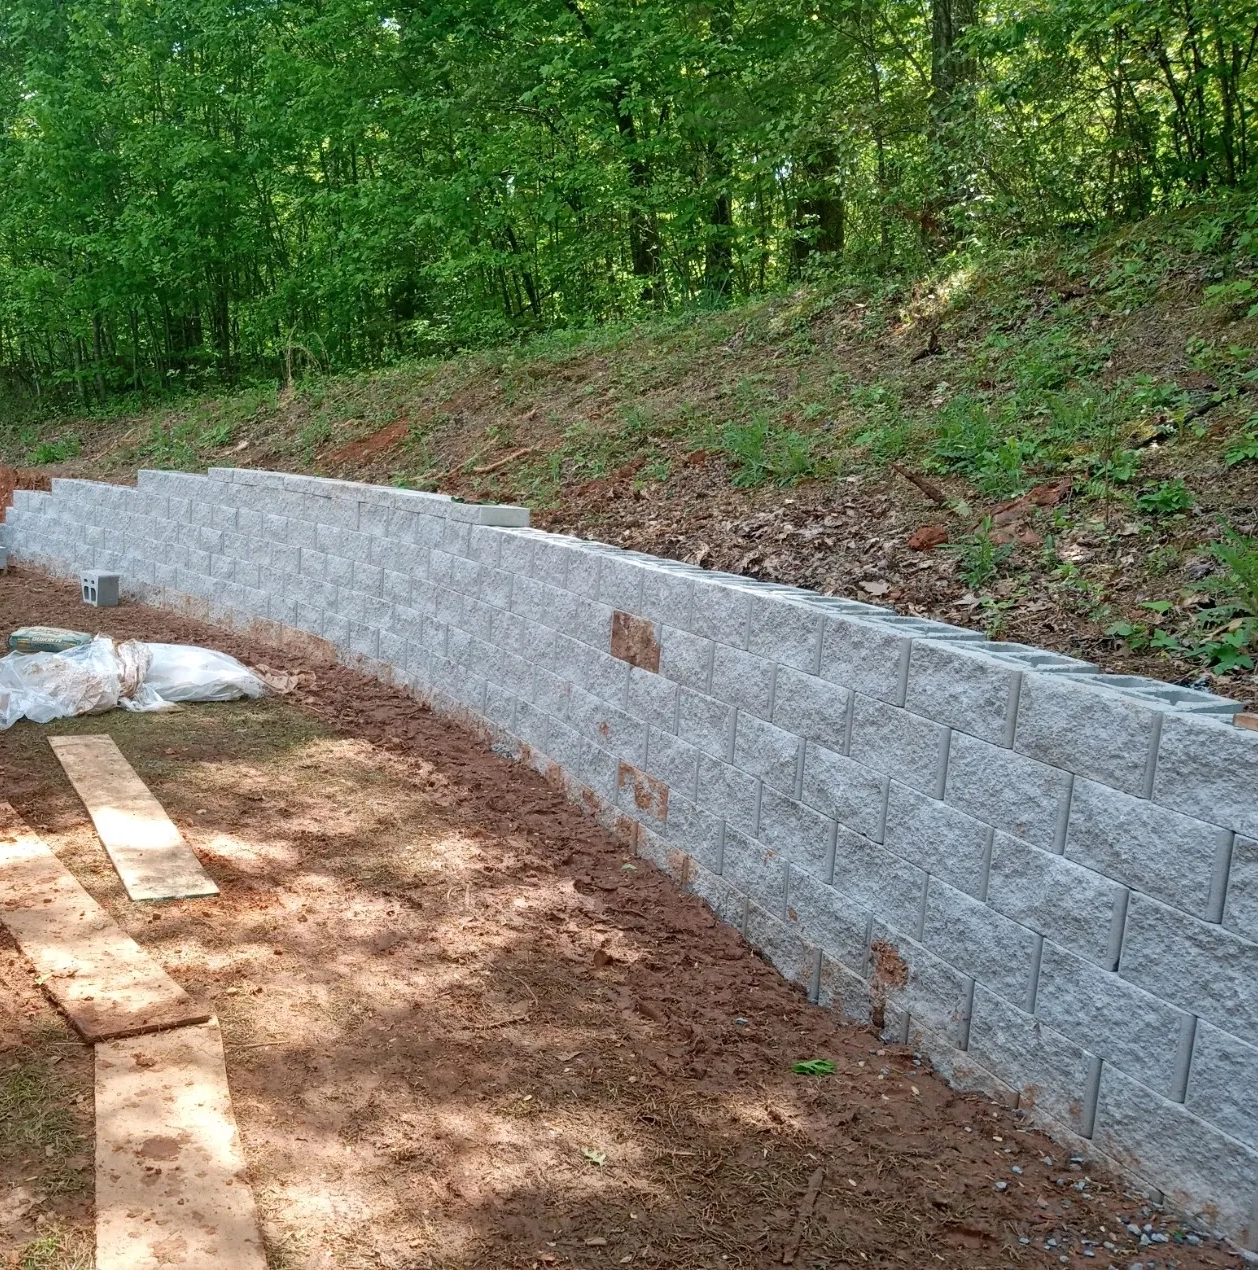 A concrete block wall is being built.